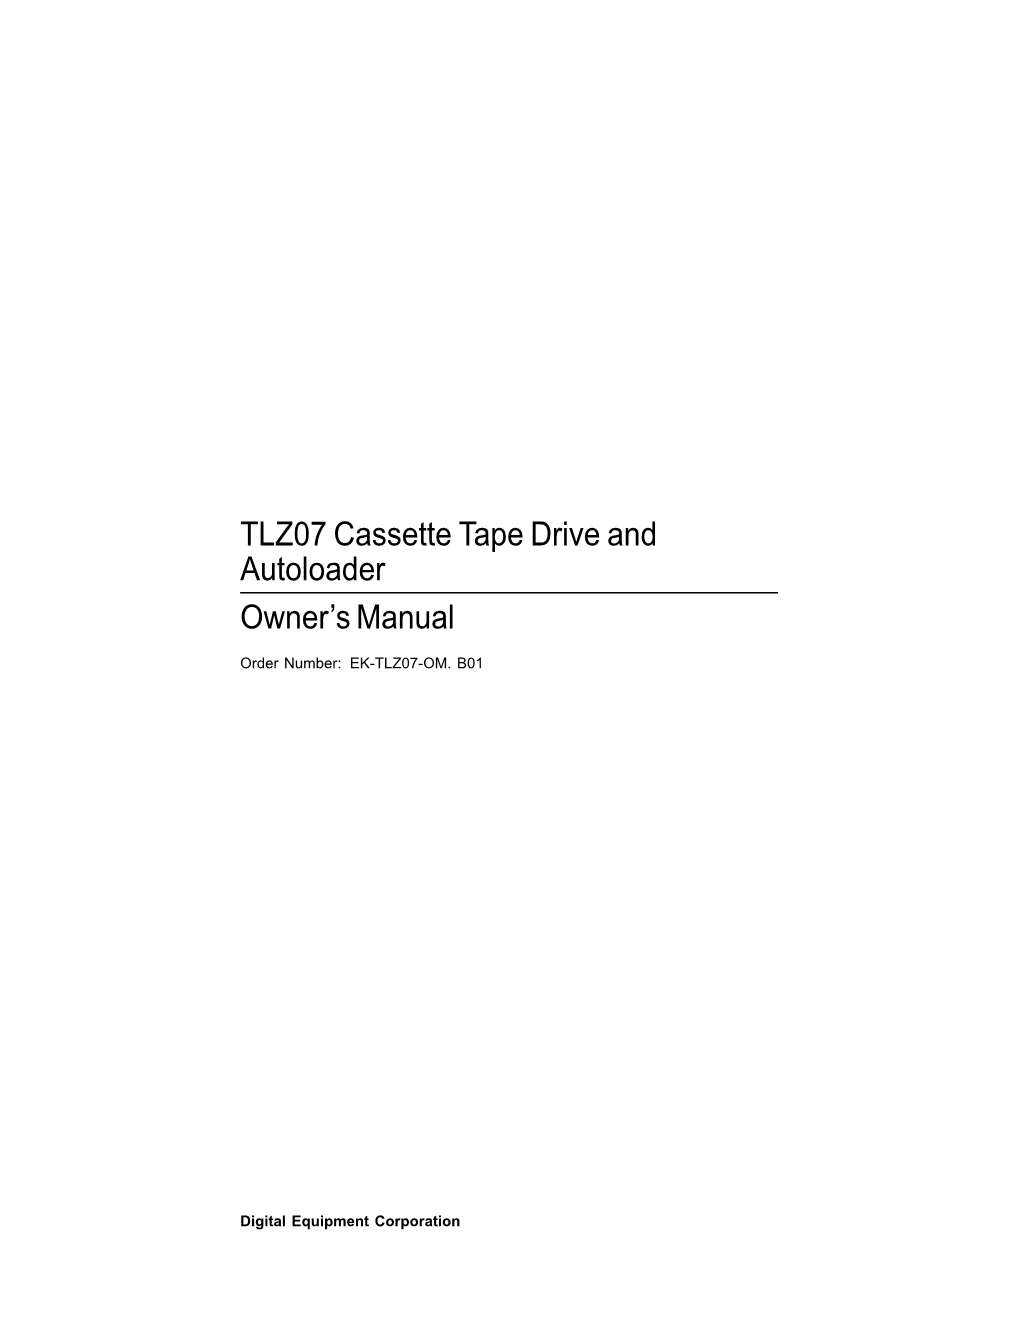 TLZ07 Cassette Tape Drive and Autoloader Owner’S Manual